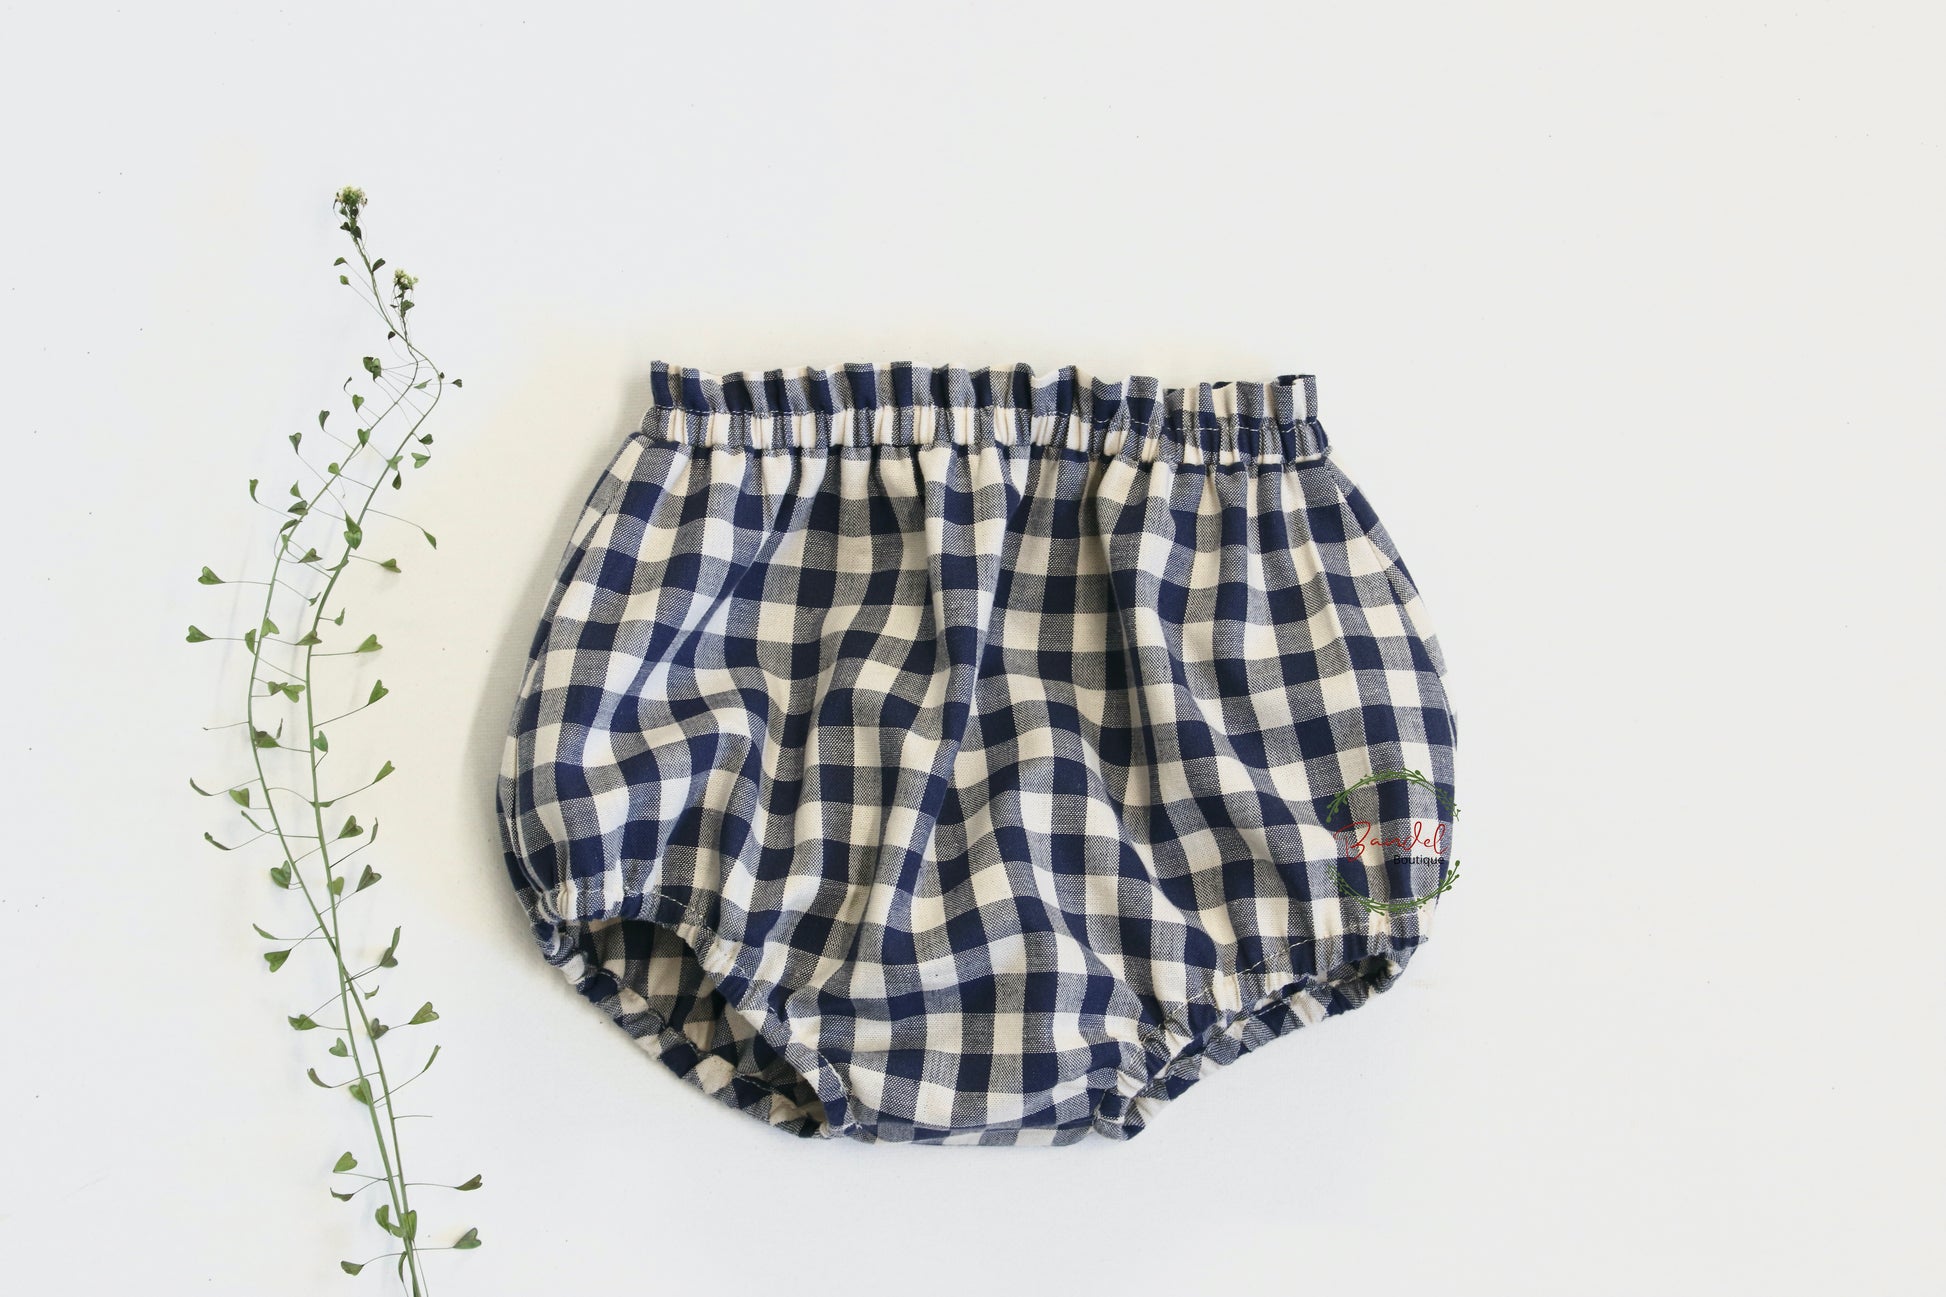 Navy Blue Cotton Bloomers are designed to keep baby and toddlers comfortable. Crafted from 100% cotton, the navy blue check pattern bloomer provides a stylish, yet comfortable fit. An ideal addition to your little one's wardrobe. Designed with frills detail at the waist and elastic waistband and leg cuffs to ensure a perfect fit for your baby or toddler.